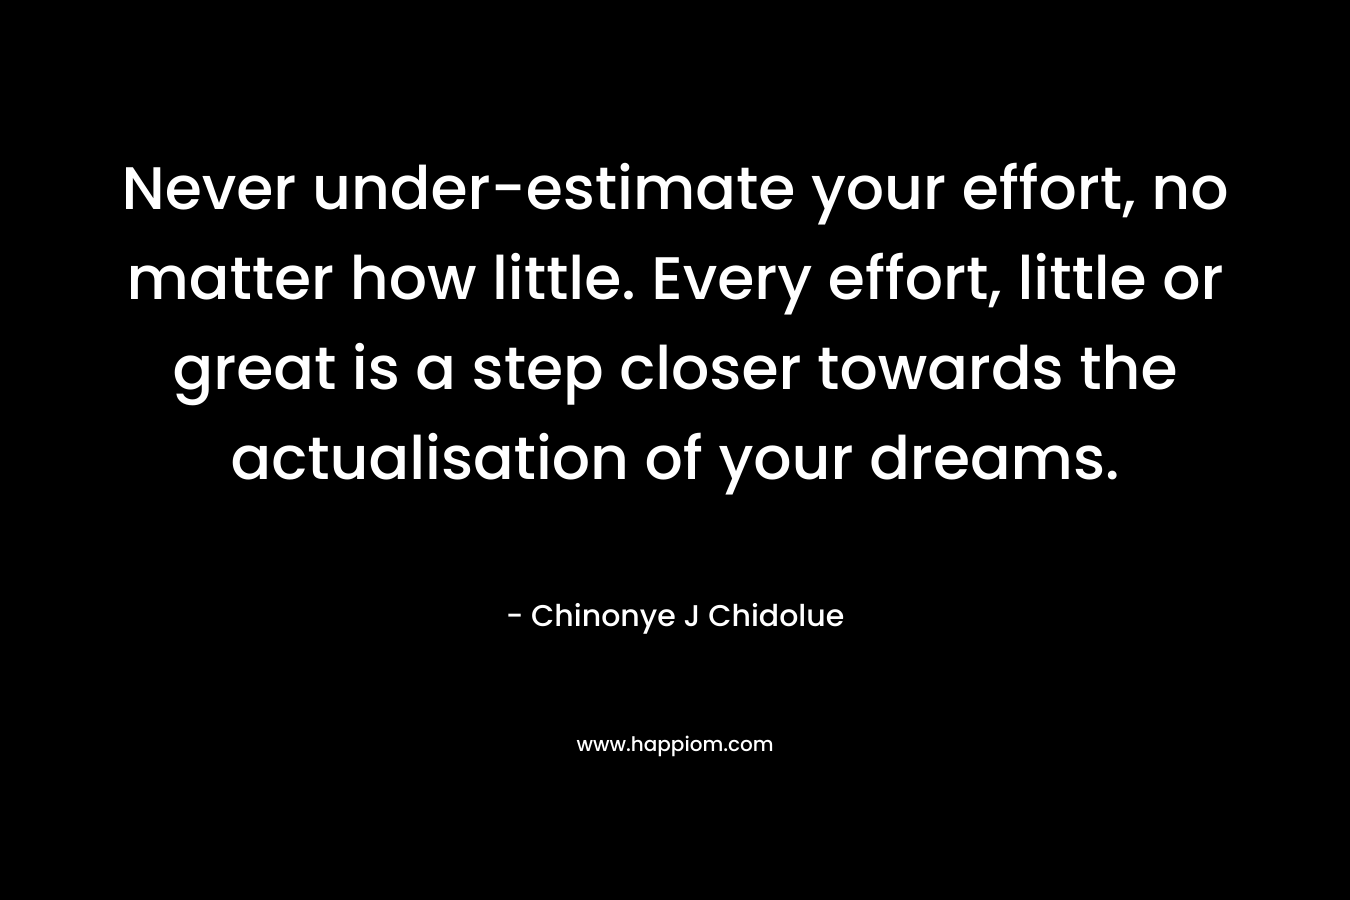 Never under-estimate your effort, no matter how little. Every effort, little or great is a step closer towards the actualisation of your dreams.